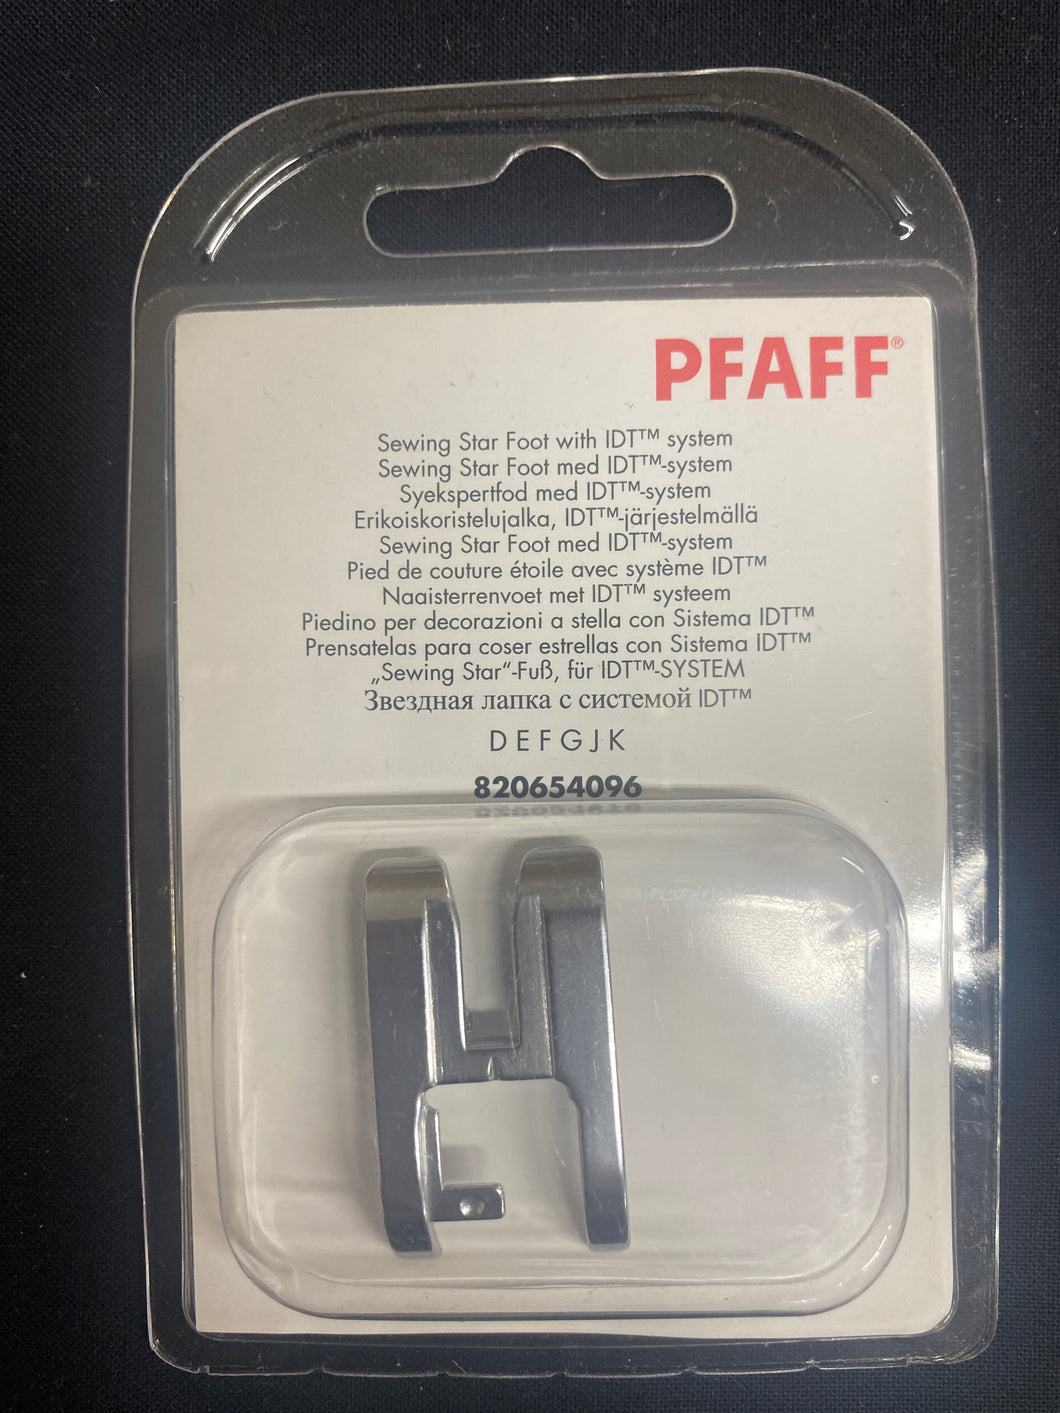 Pfaff Sewing Star Foot with IDT